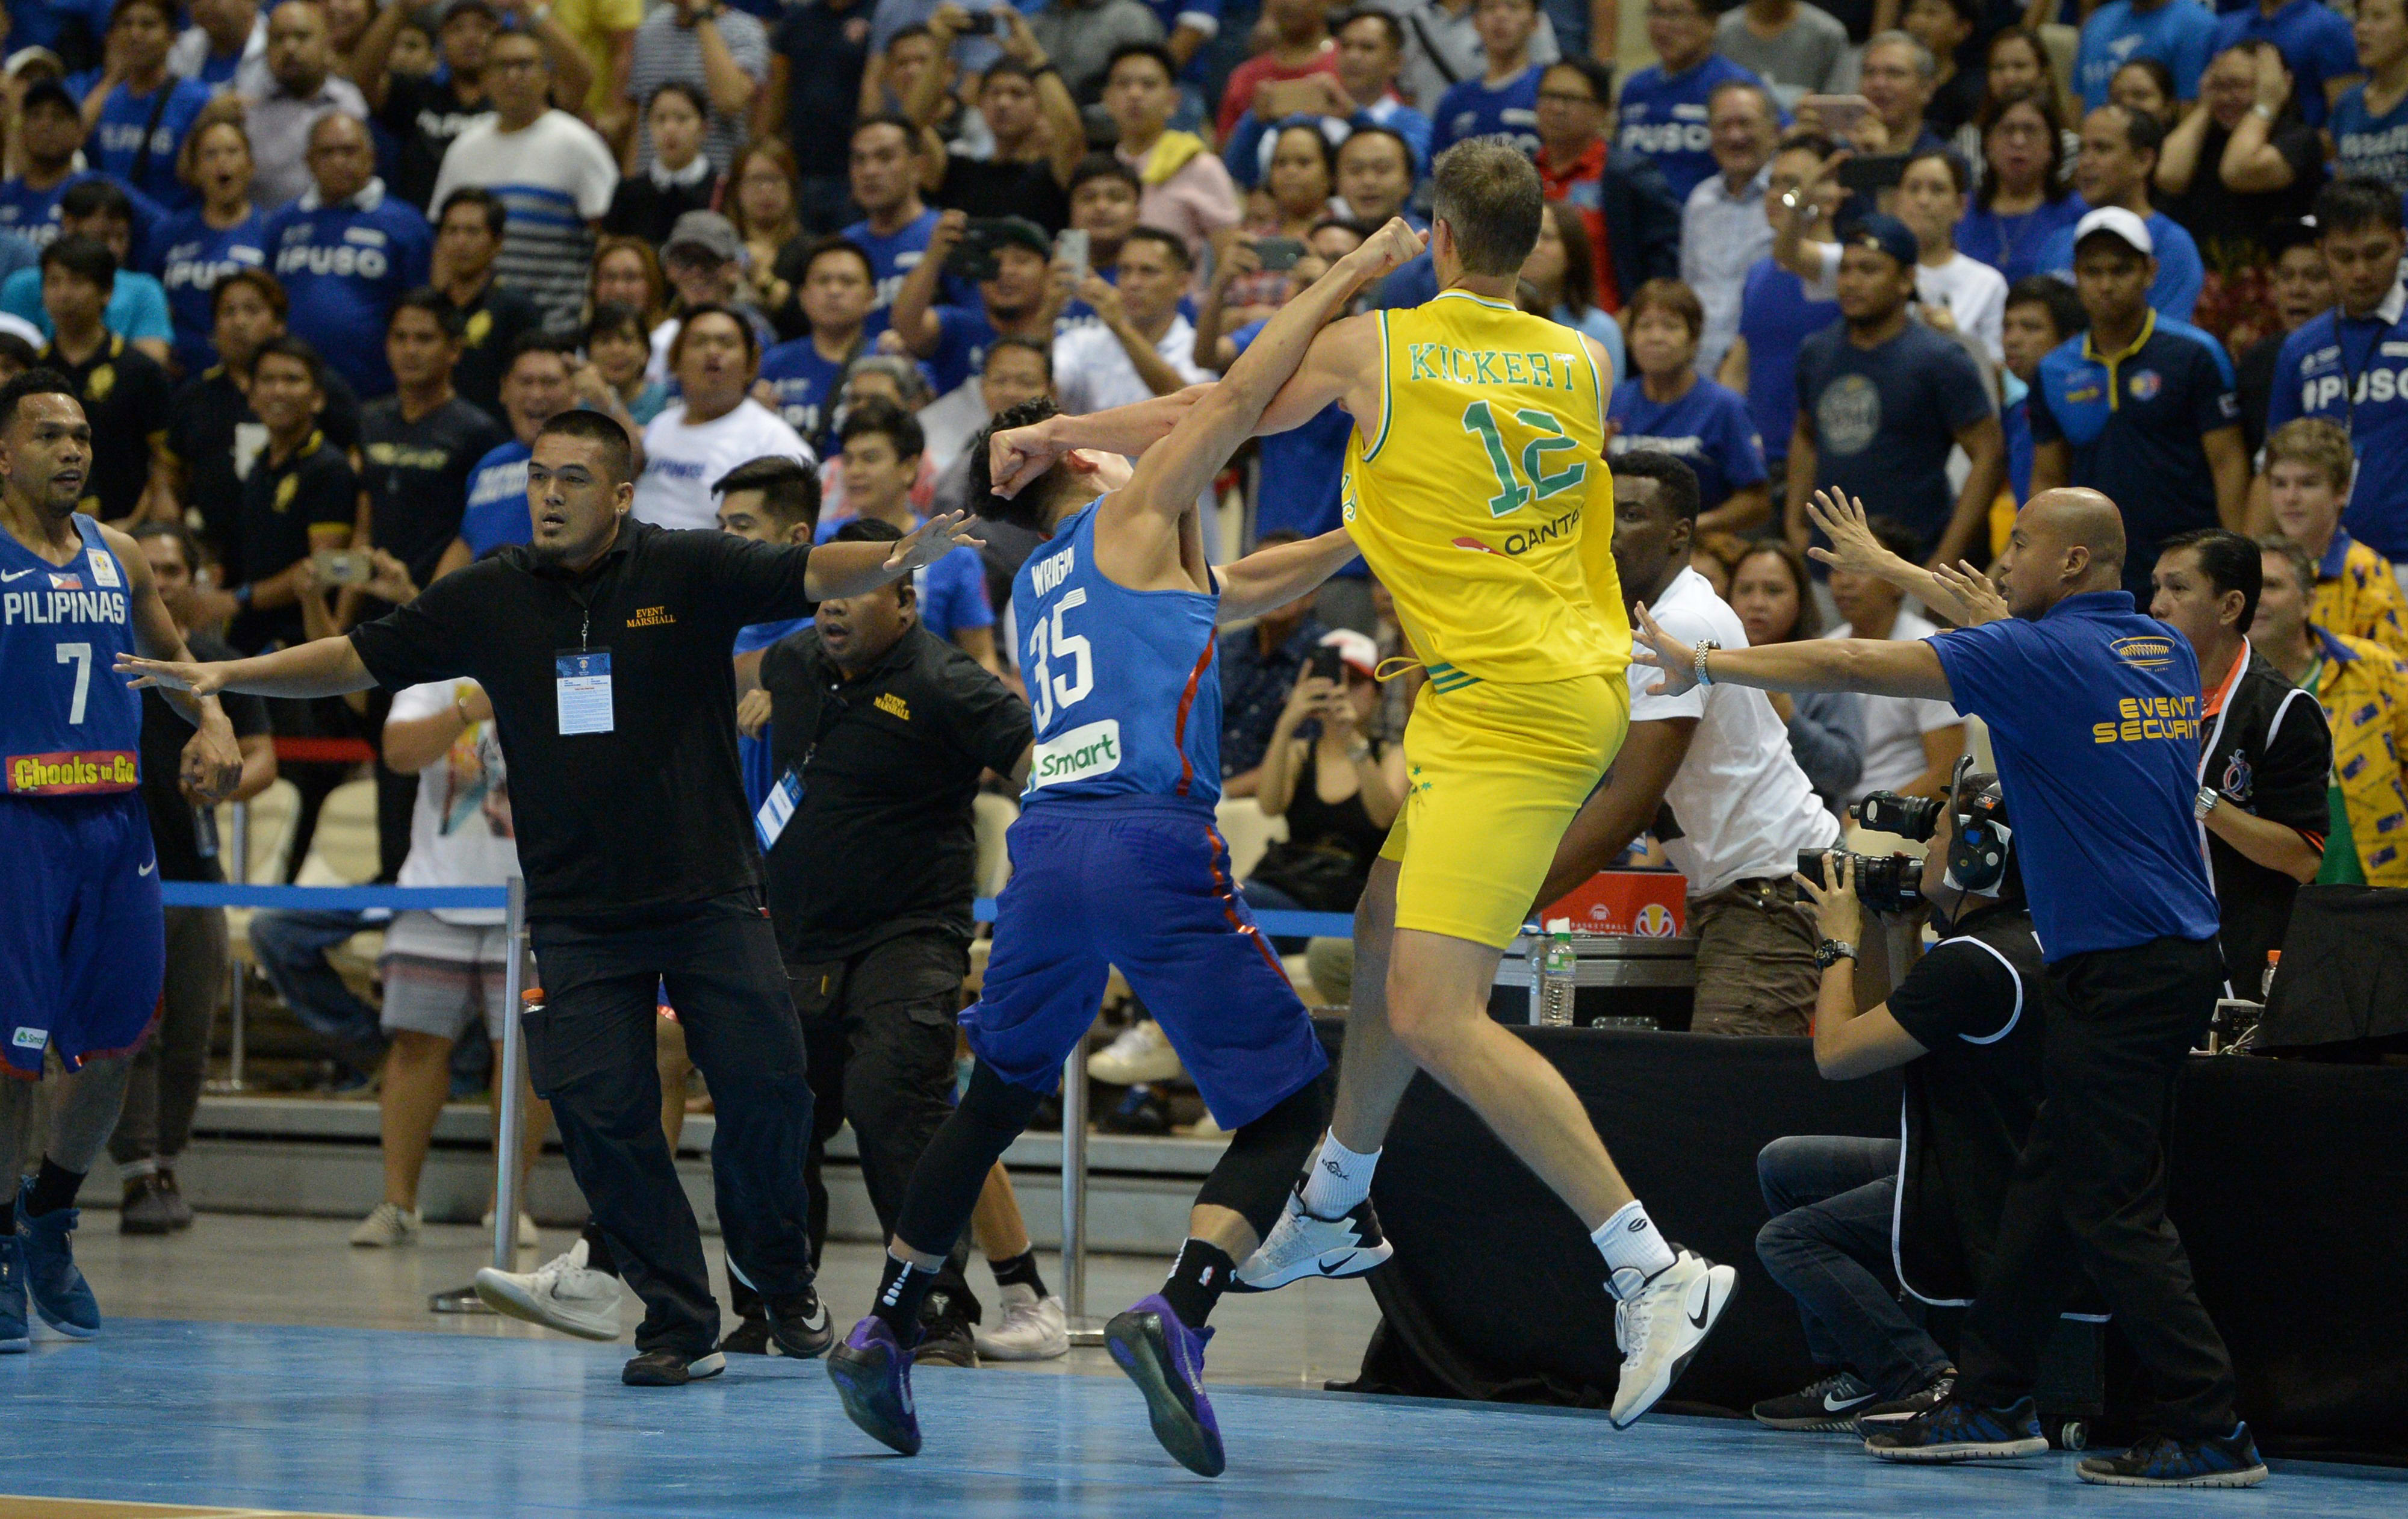 A brawl erupts between Australia and the Philippines players in a FIBA World Cup 2019 qualifier.